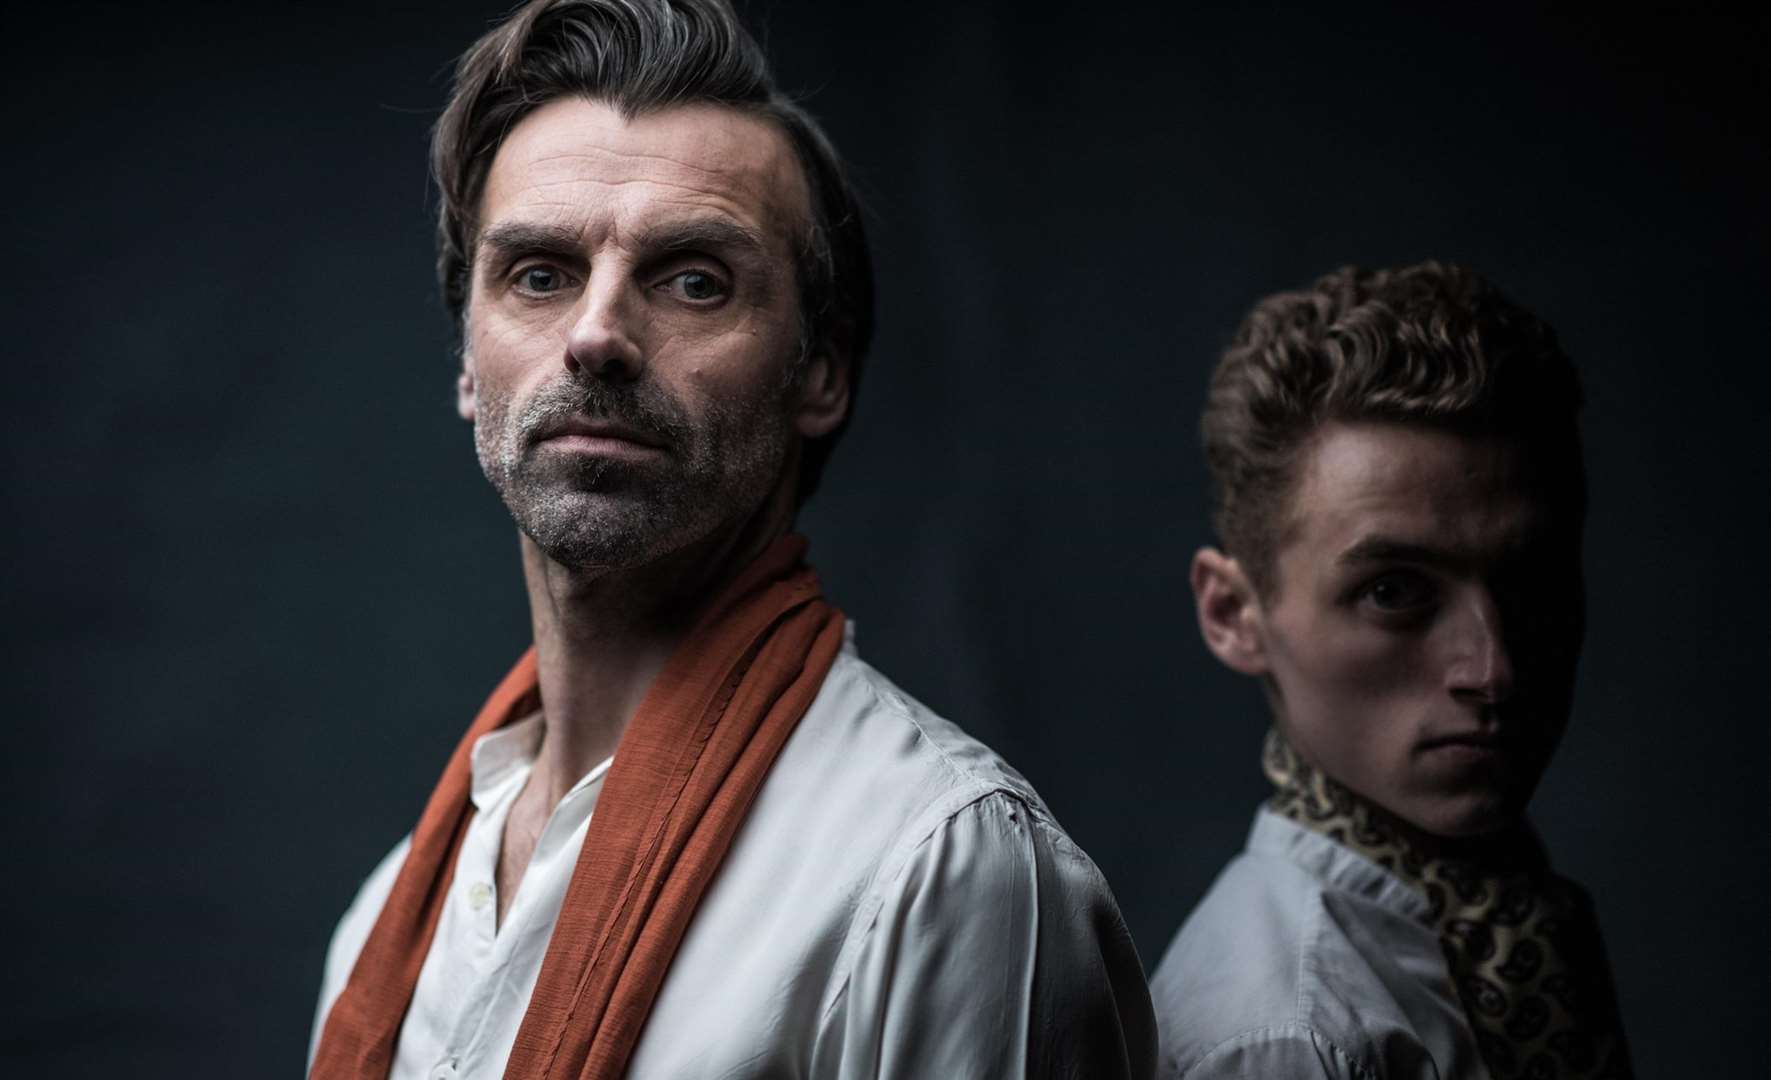 The Picture of Dorian Gray will premiere at the Churchill Theatre in Bromley